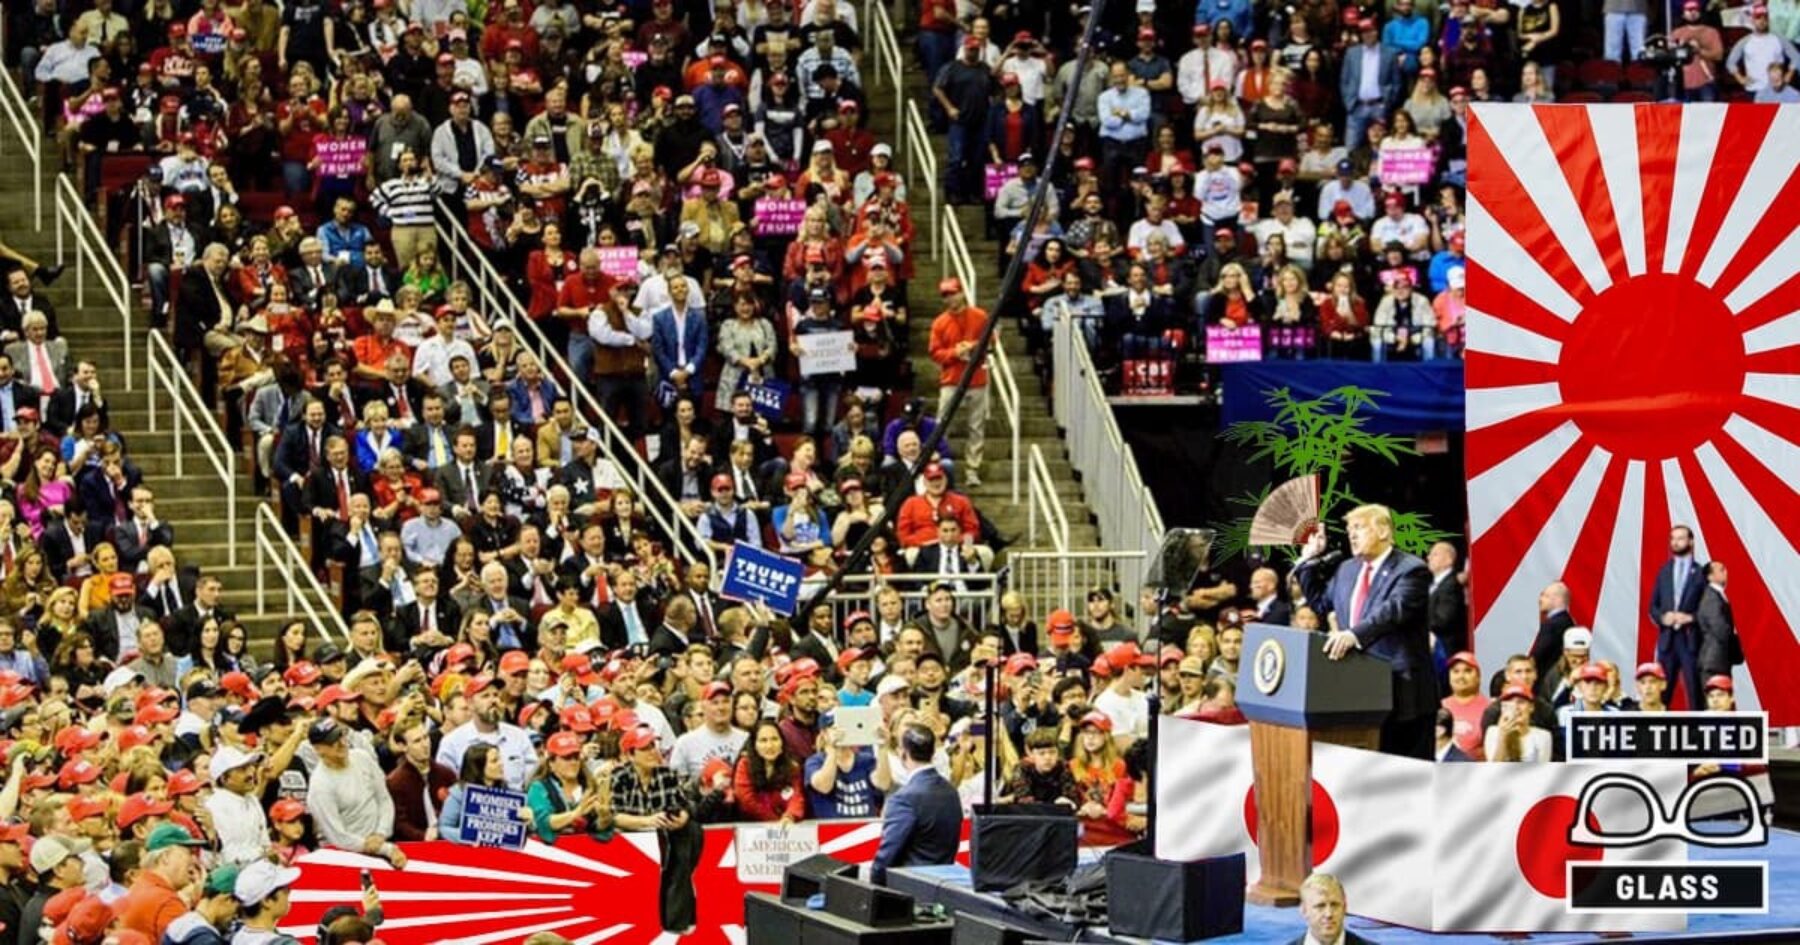 Trump Boasts “Old School Nationalism” Inside The Japanese Toyota Center